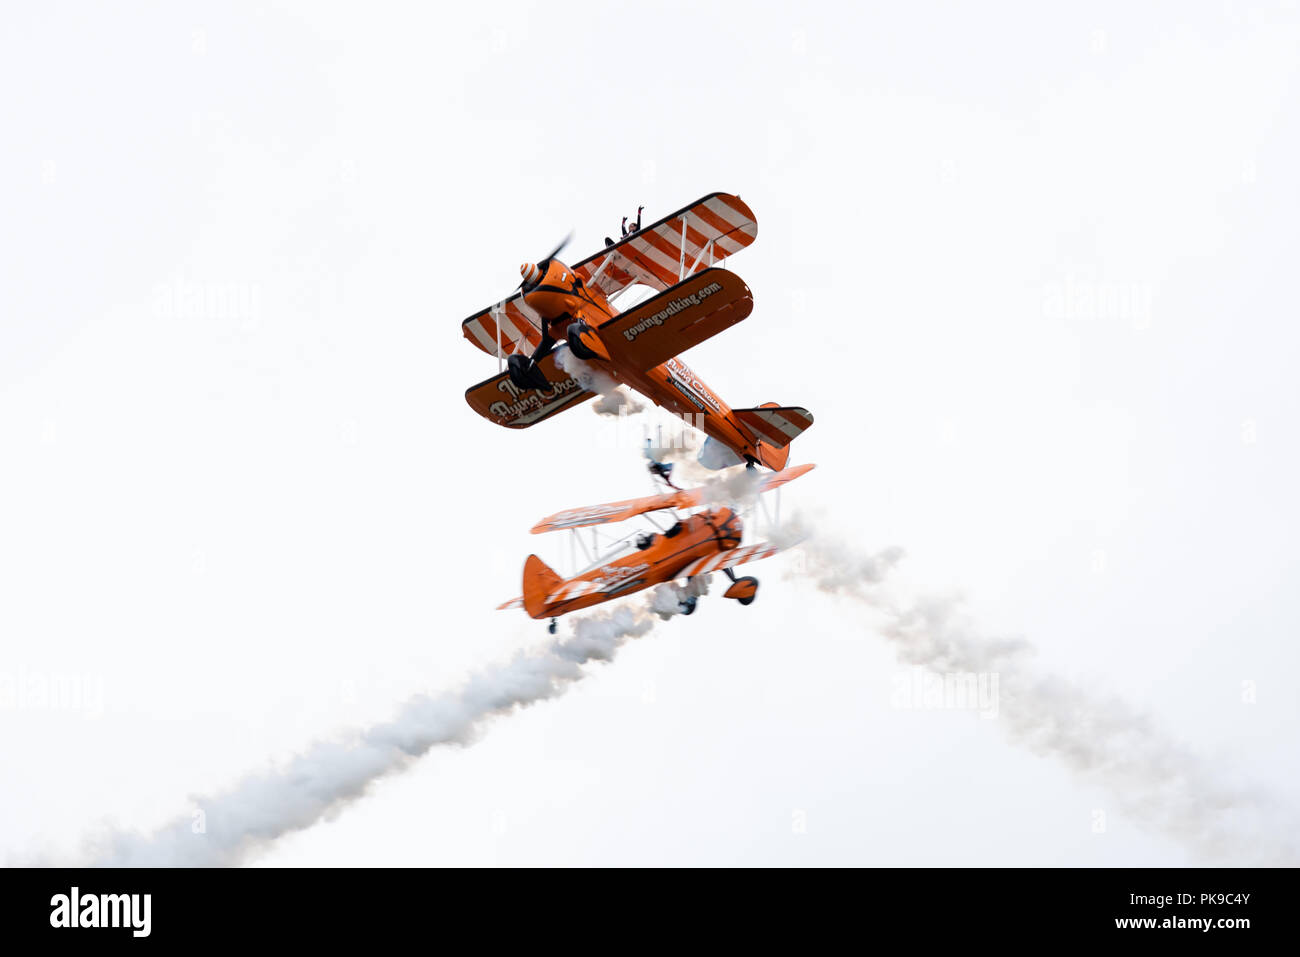 Boeing Stearman biplanes of the AeroSuperBatics Flying Circus come perilously close during their aerobatic display. Stock Photo